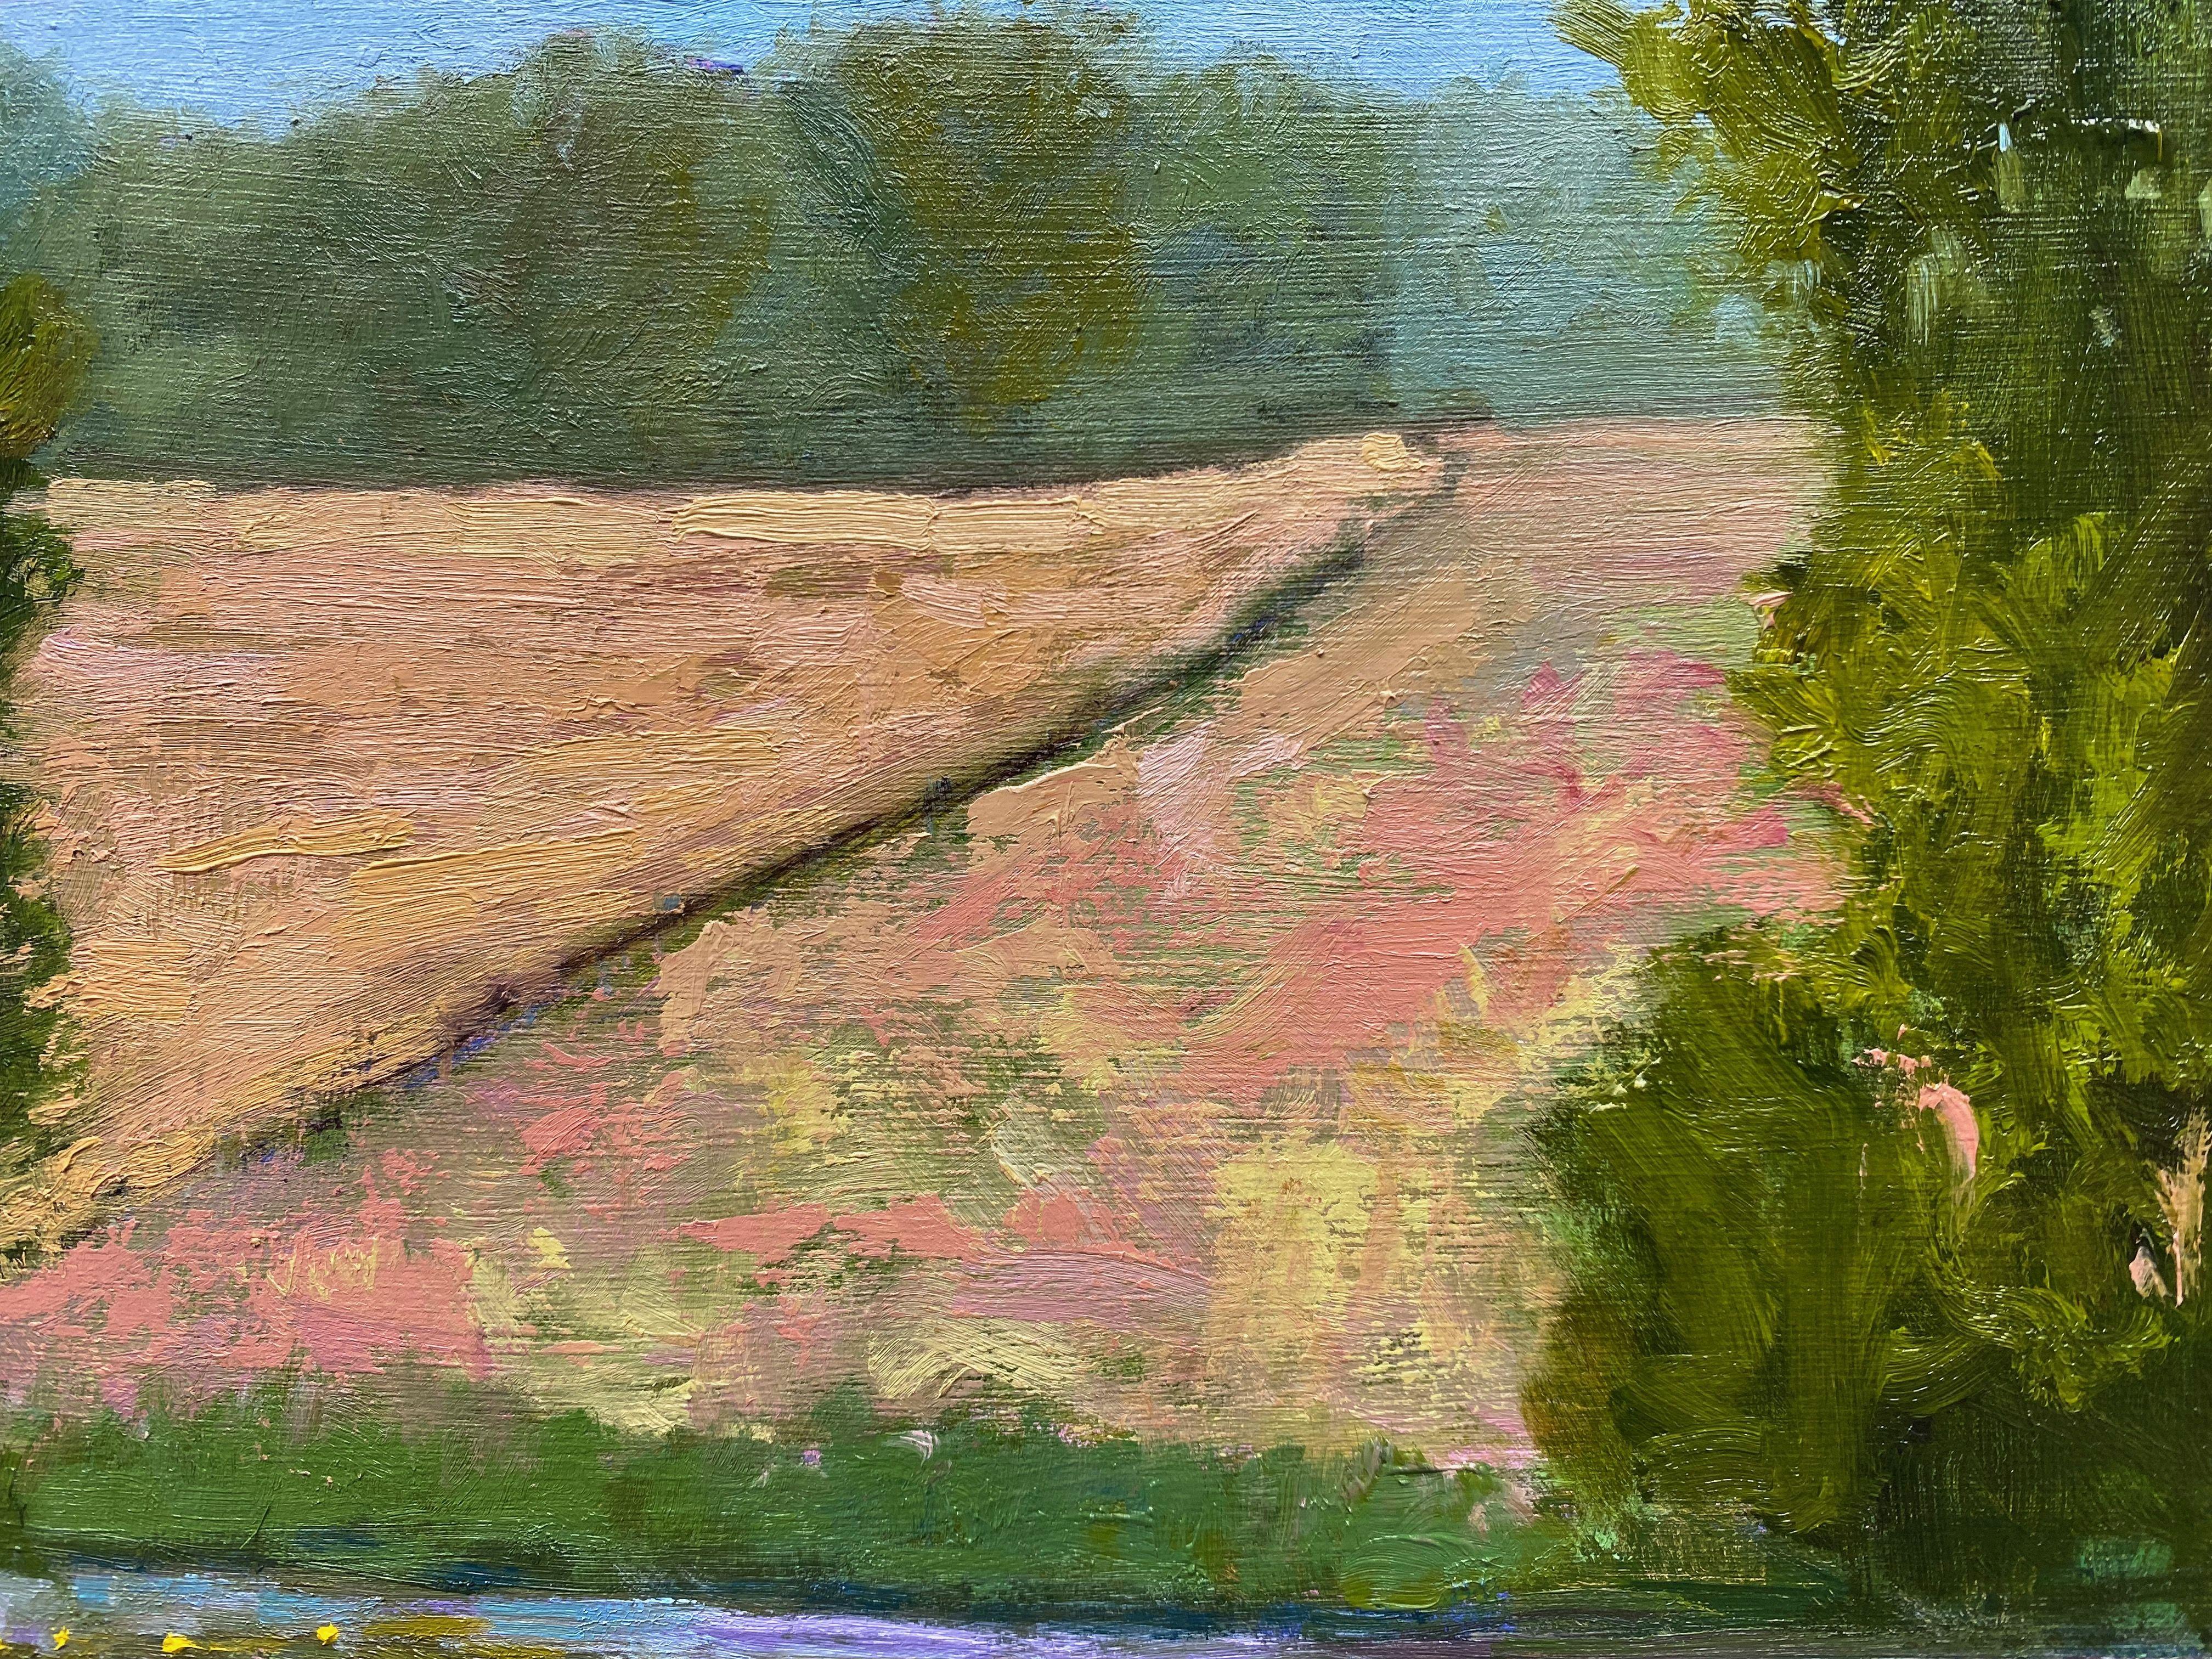 This painting started as a plein air painting in 2020, finished in my studio in 2022.  My painting show where the Fabbenstedter Ditch flows into the River Big Aue, Espelkamp, Germany. What attracted mew to the scene was the Cow Lilies. :: Painting